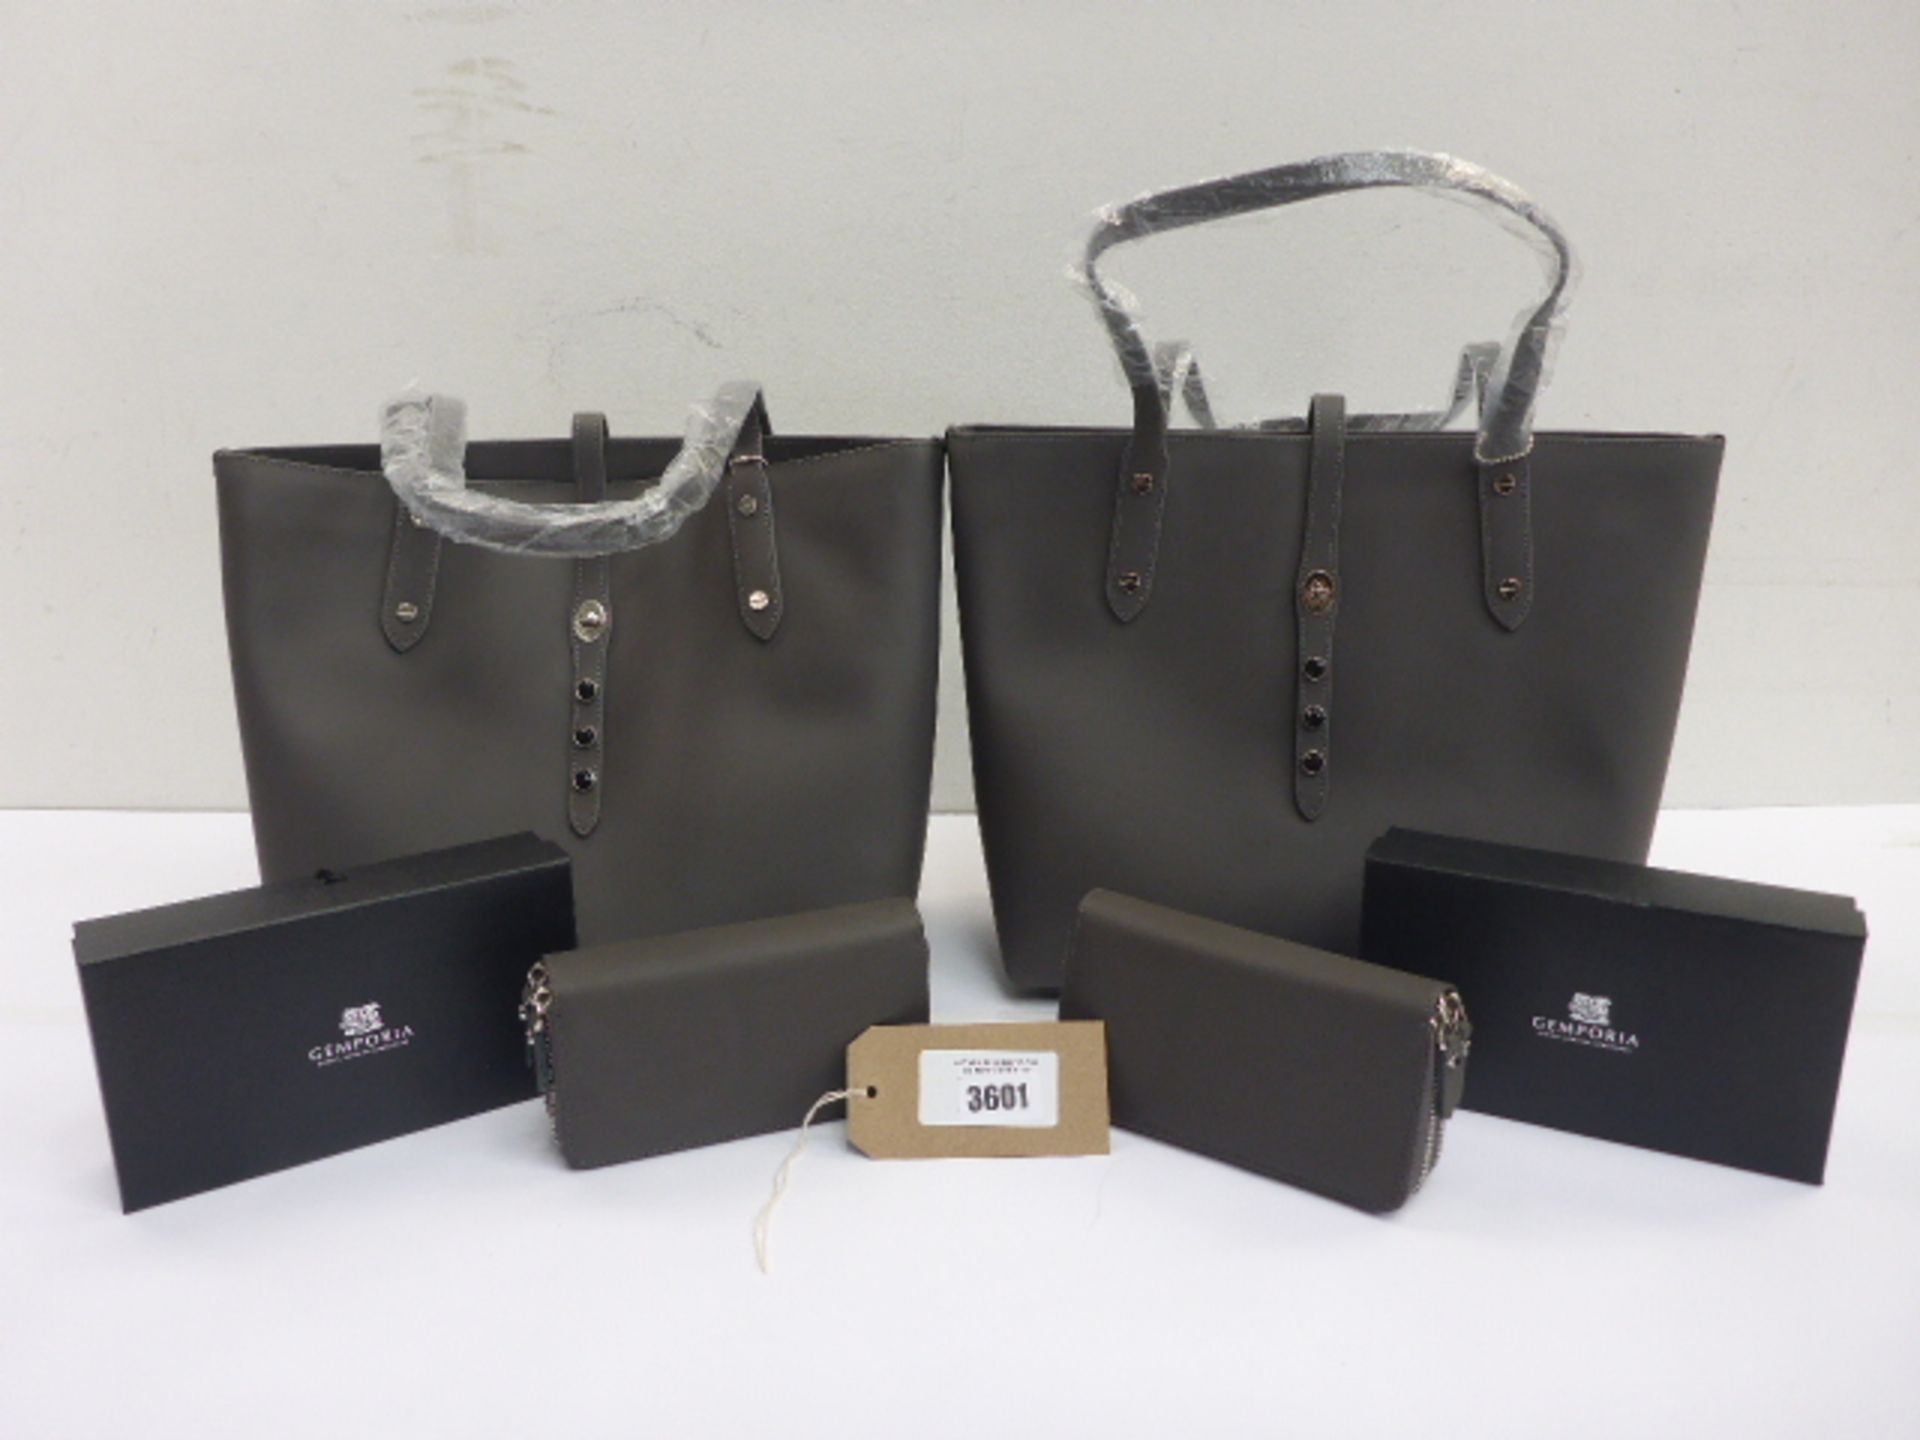 Two Gemporia grey leather and Onyx hand bags and purses